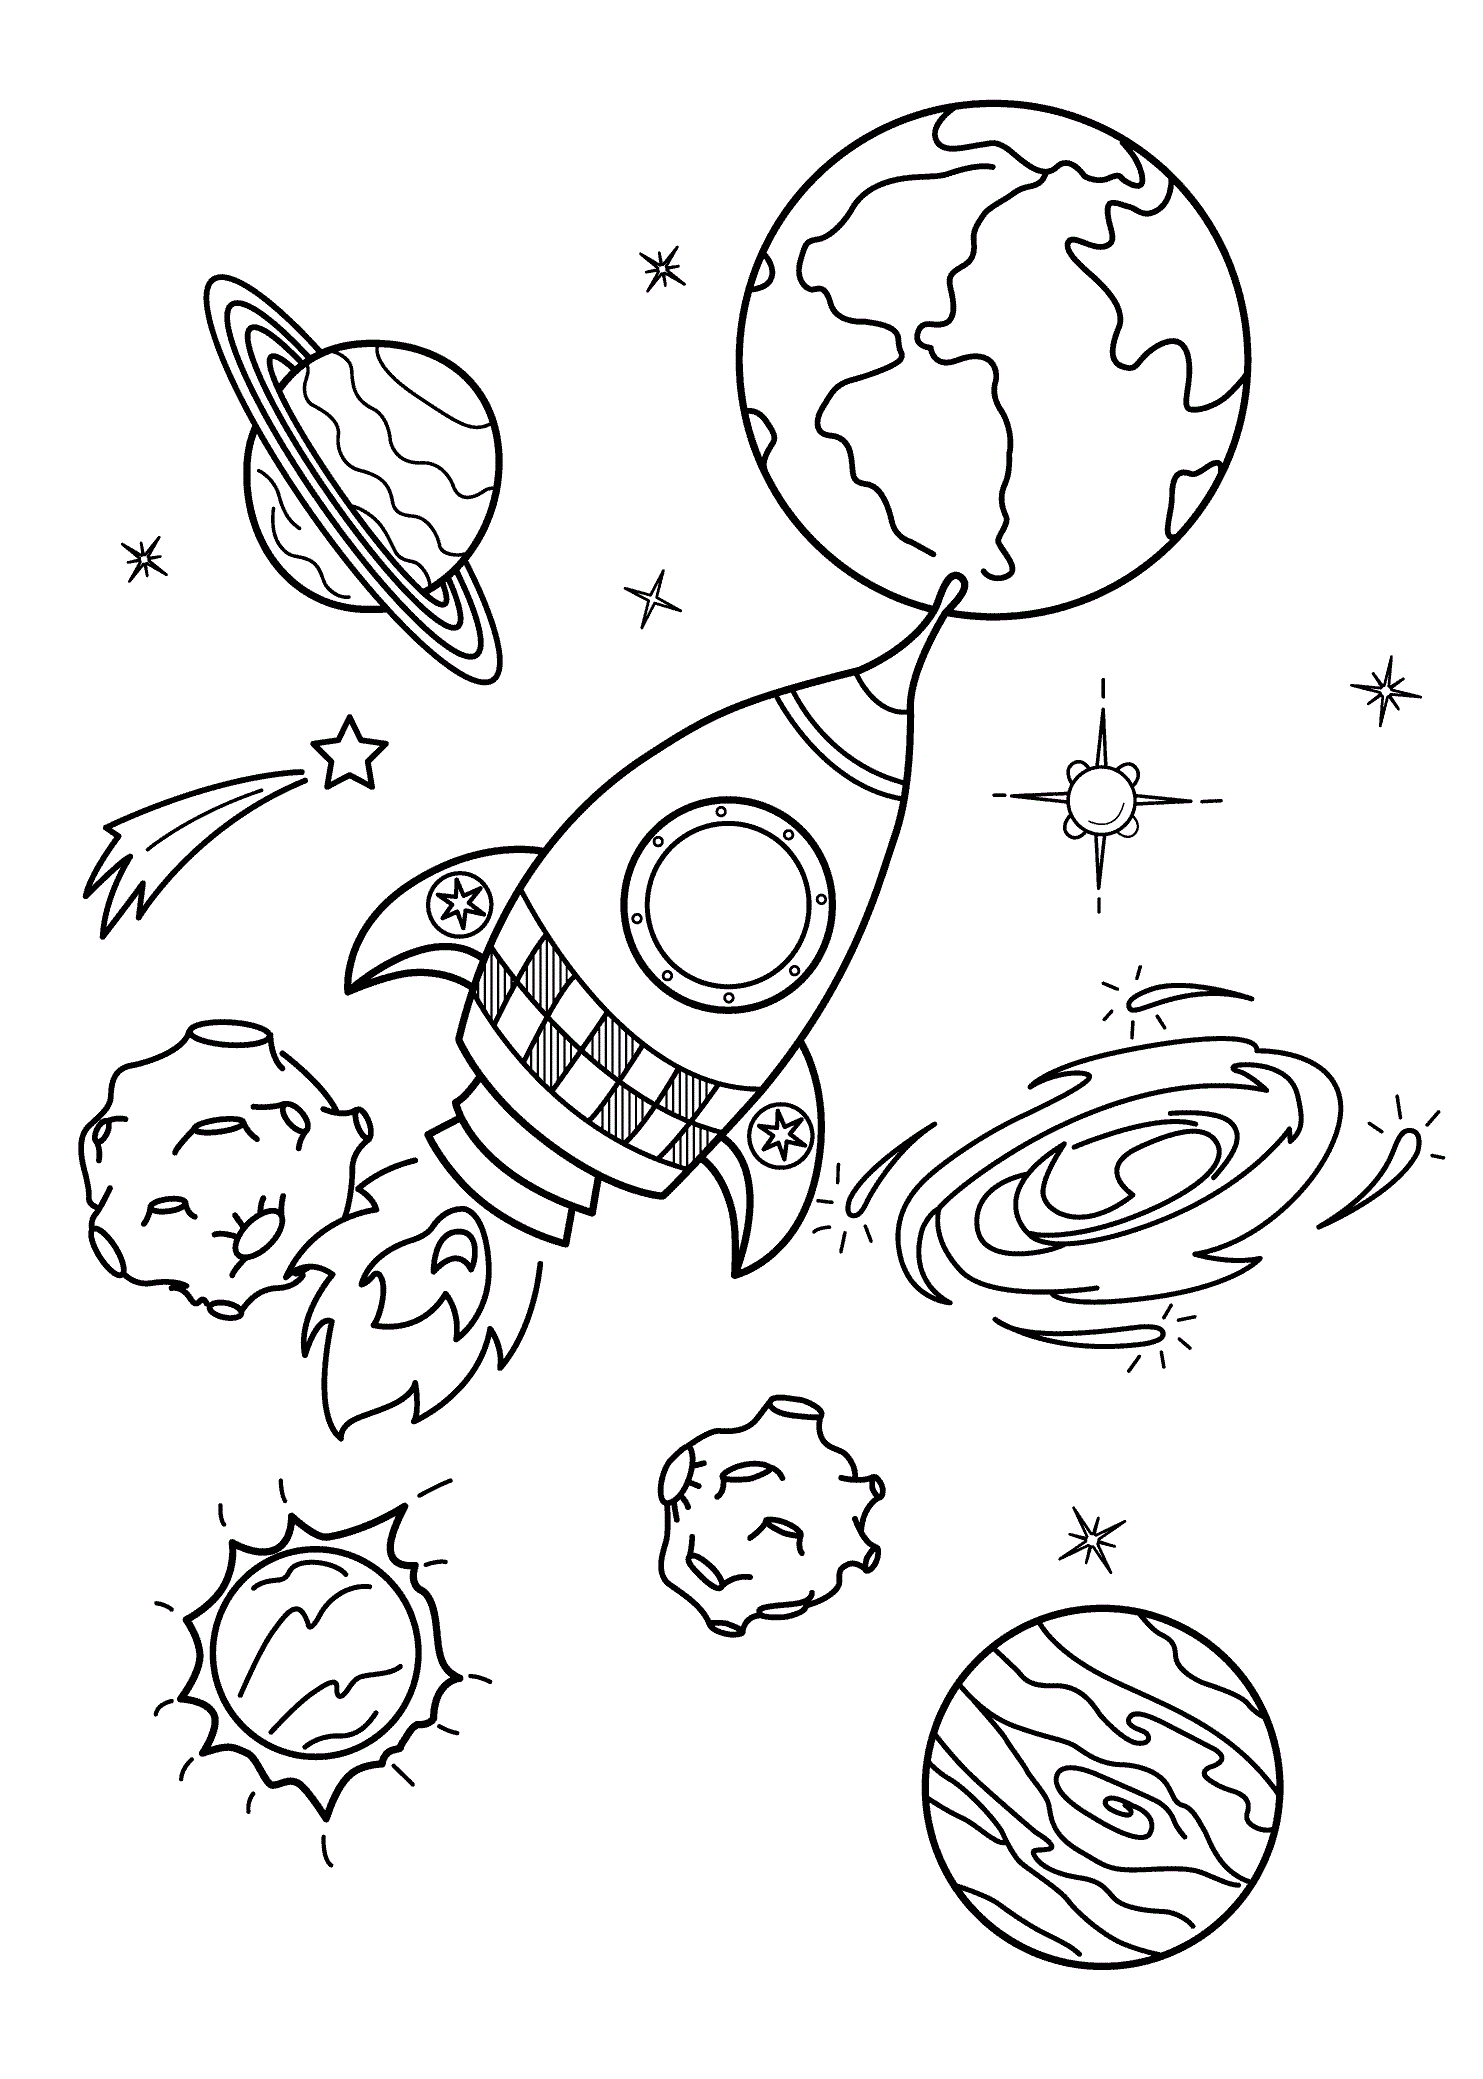 Spaceship And Planets Coloring Page